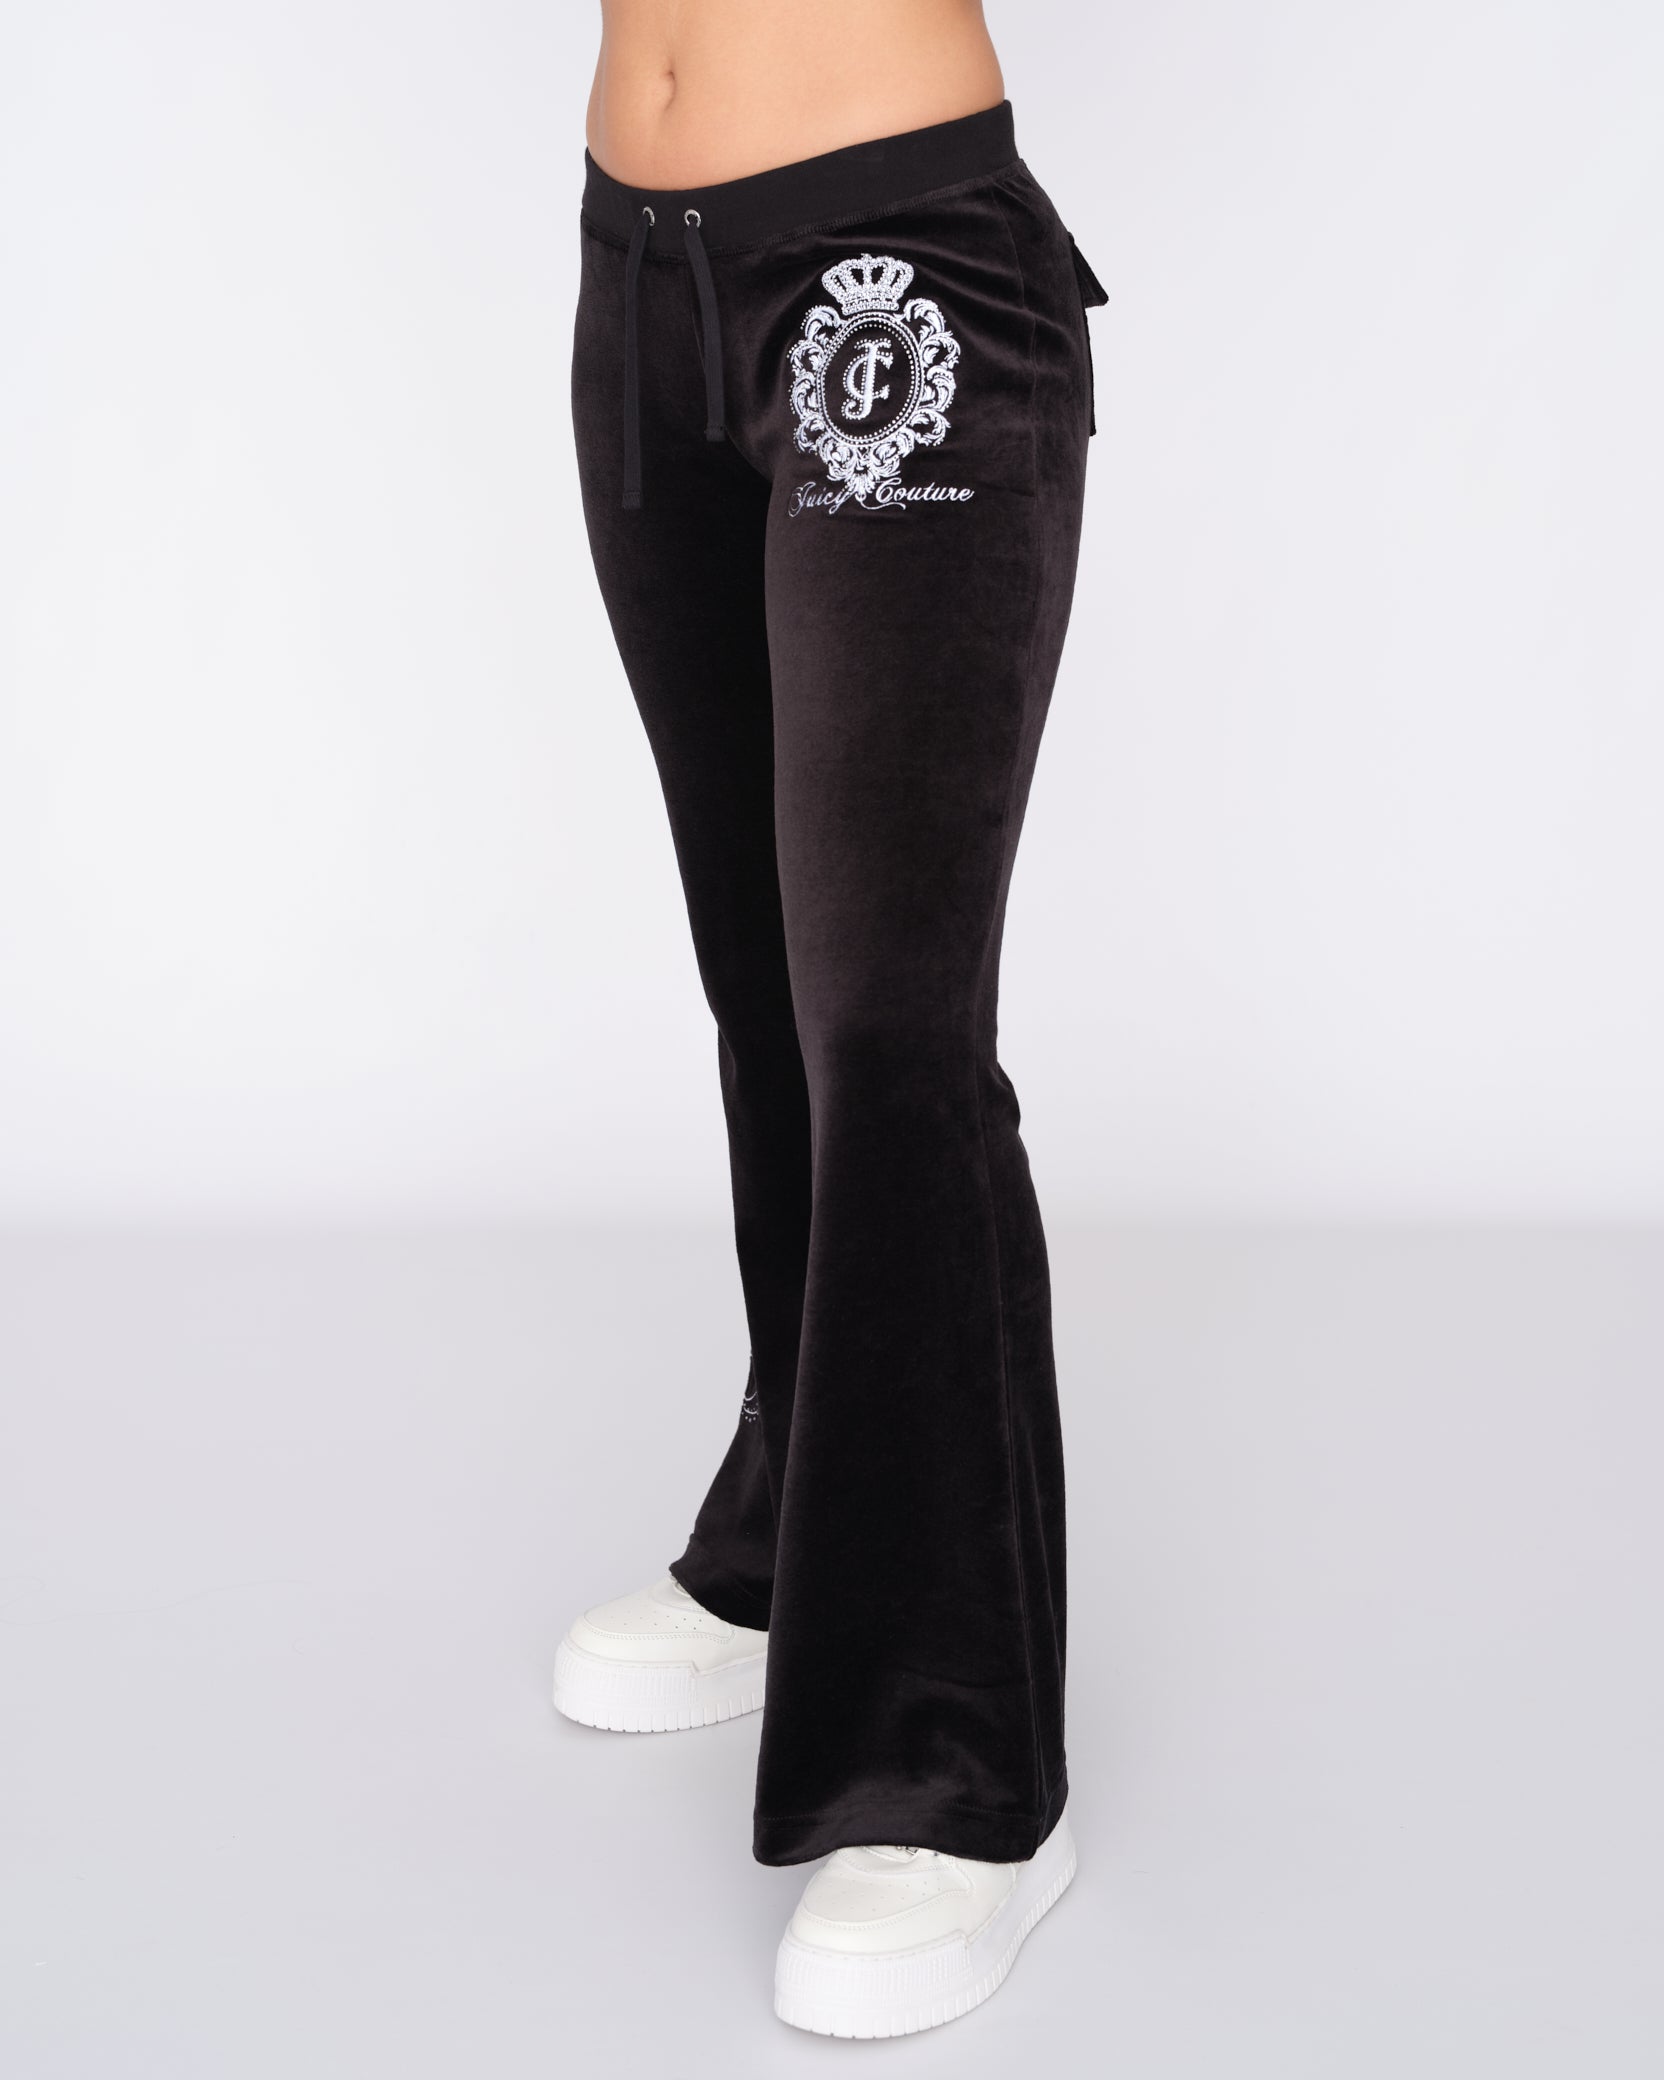 Juicy Couture Heritage Crest Ultra Low Rise Pant Black